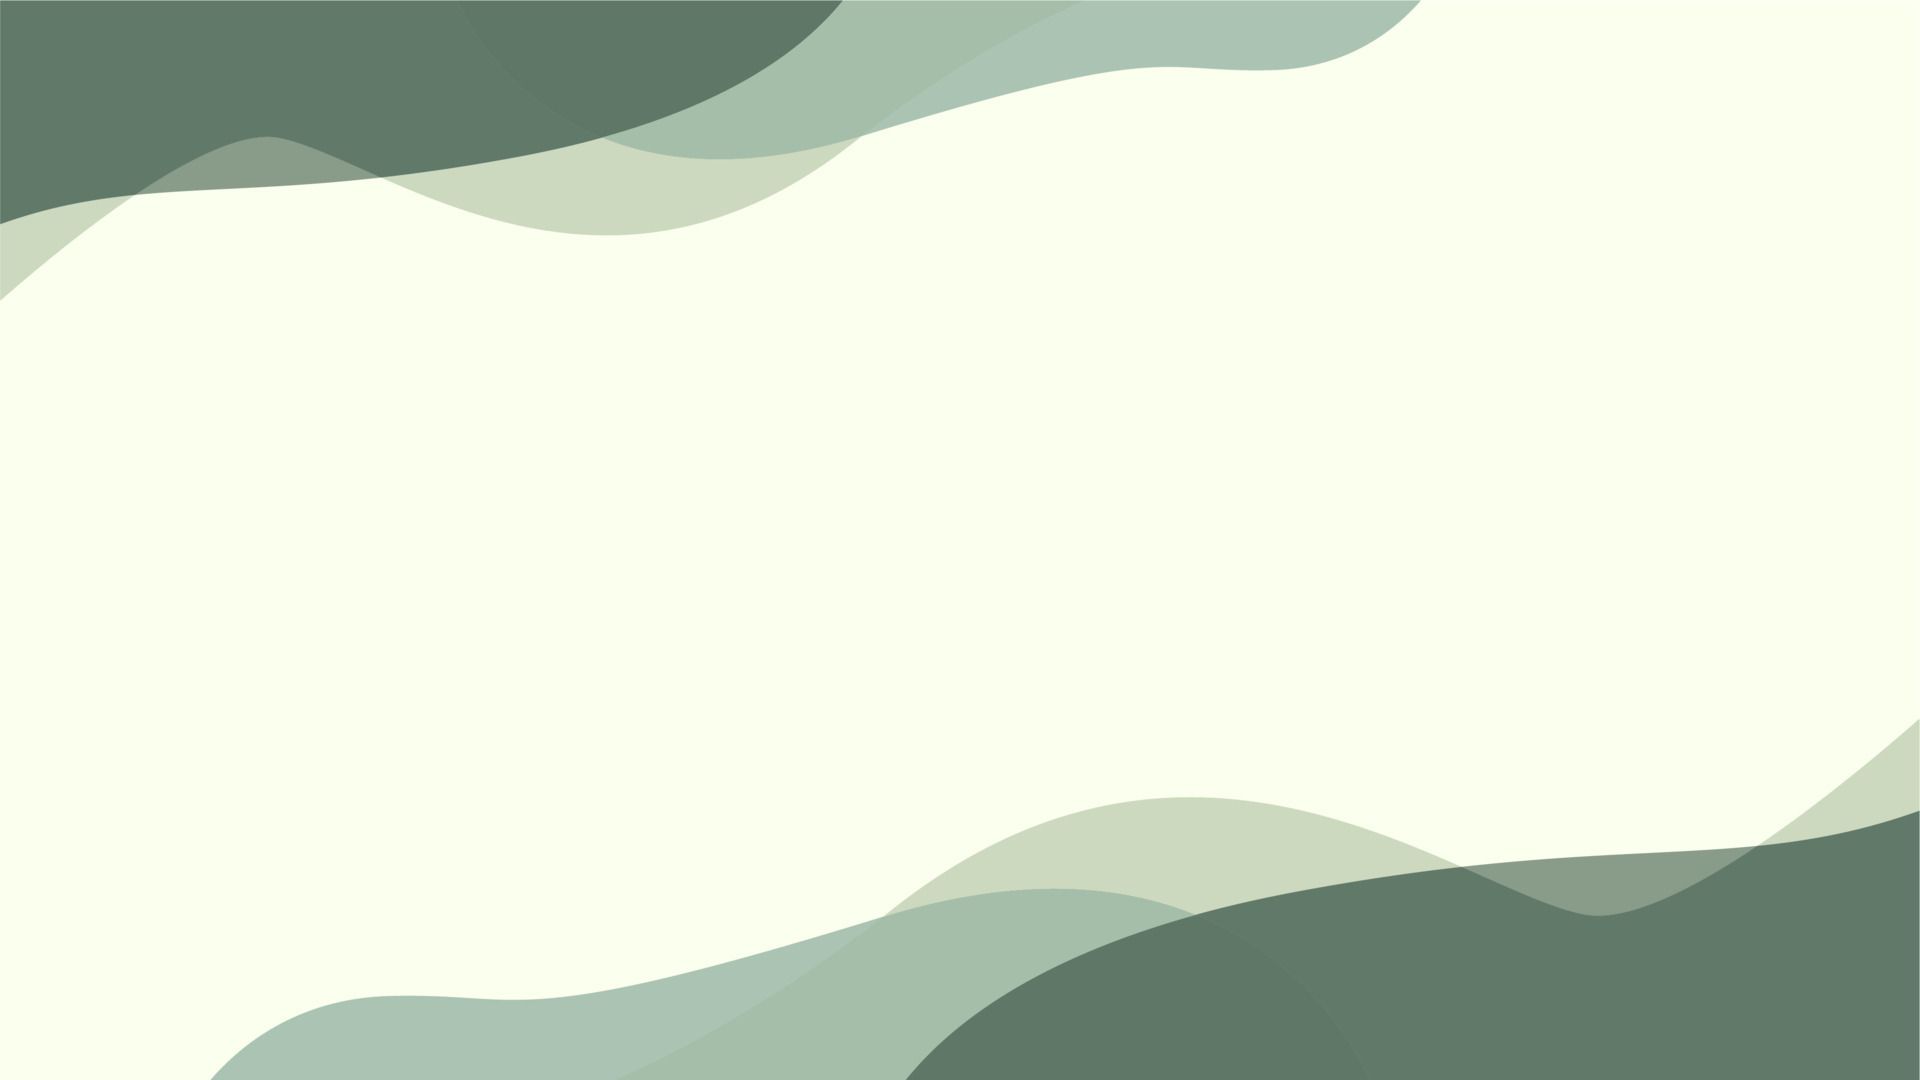 Aesthetic sage green background